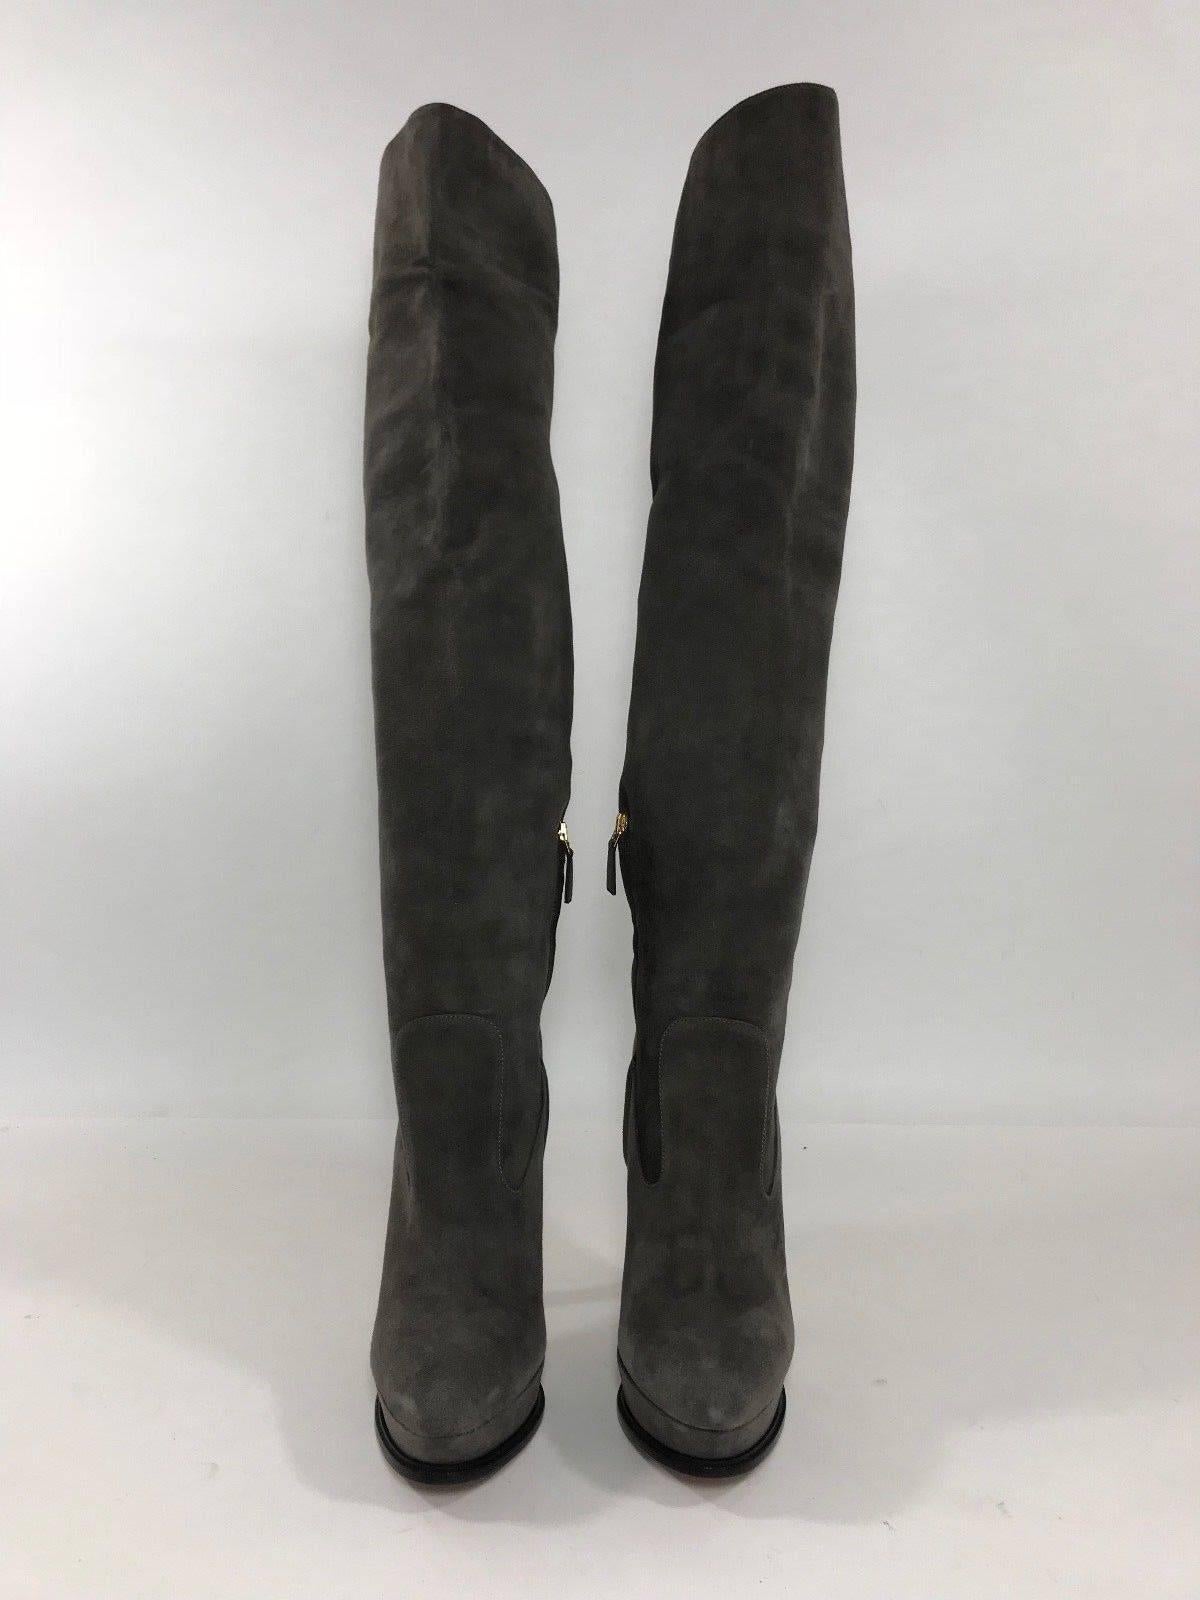 MODEL - Prada Slouch Over the Knee High Heel Platform Boots in Grey Suede
	
SKU - 1692
	
ORIGINAL RETAIL PRICE - 950 + tax
	
SIZE - US 10/Euro 40
	
MODEL DETAILS - Calzature Donna Camoscio Grigio
	
MATERIAL - Suede
	
COLOR - Grey
	
COMES WITH - Box,